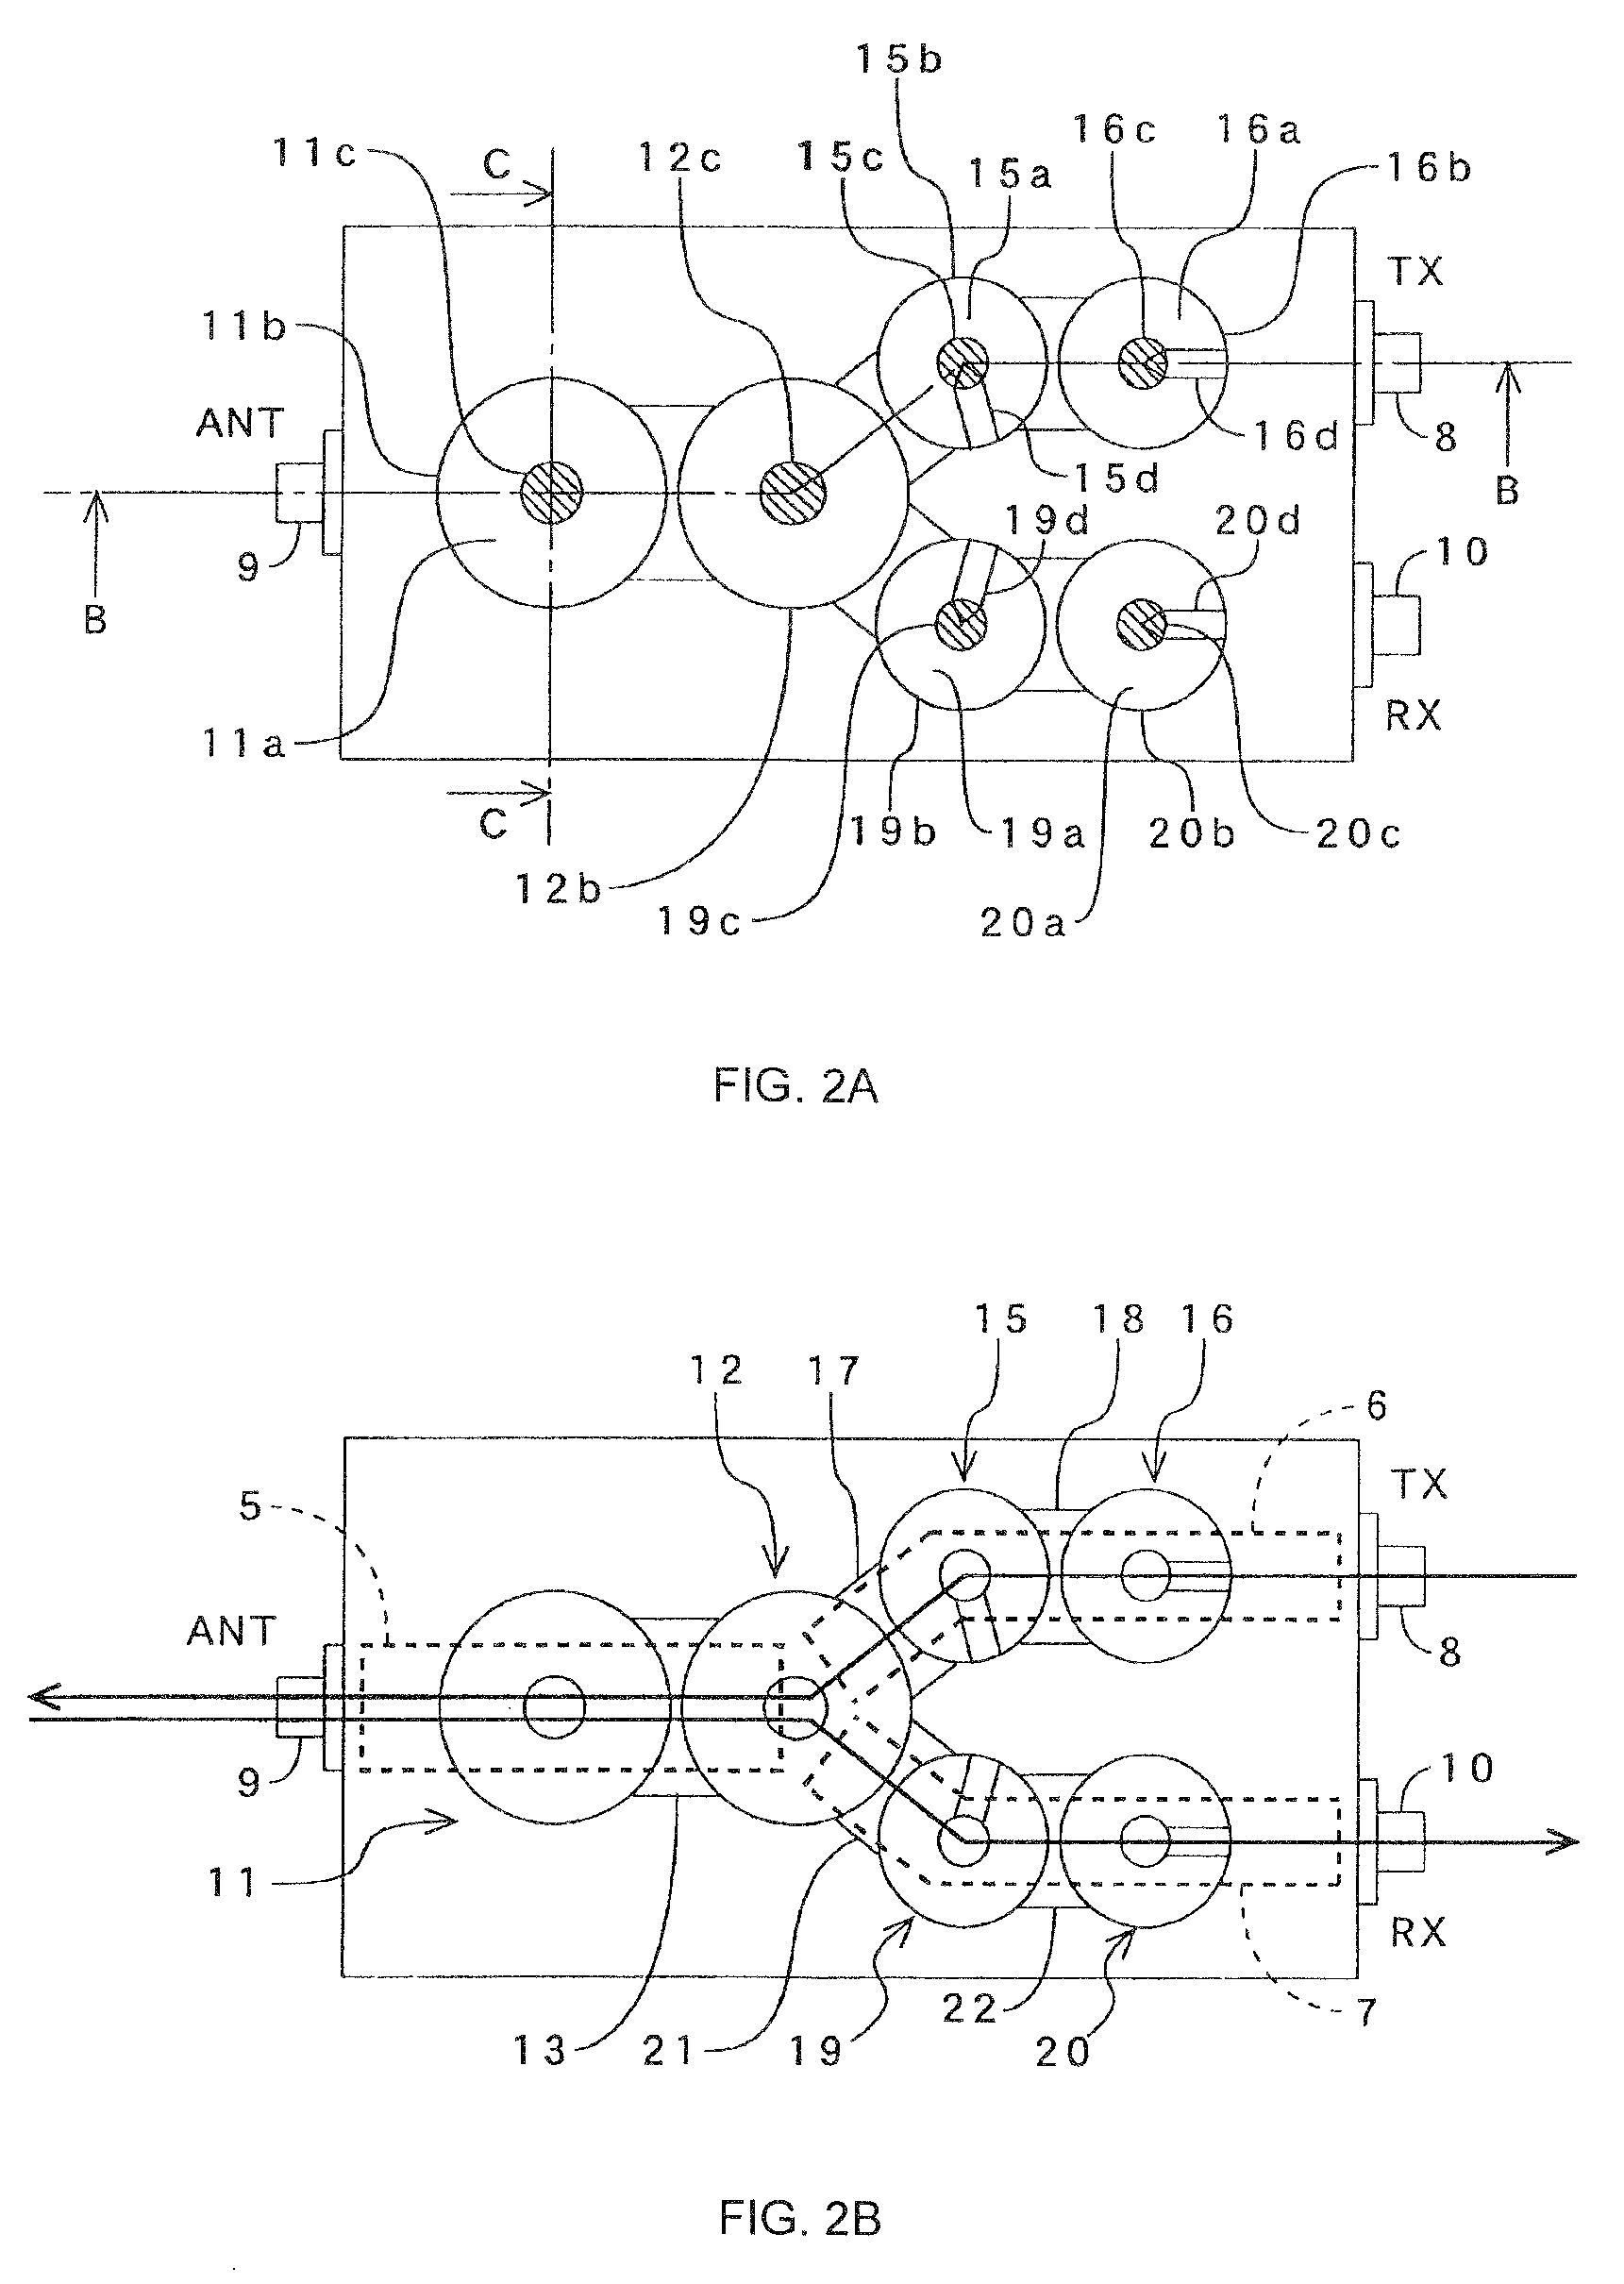 Filter having switch function and band pass filter